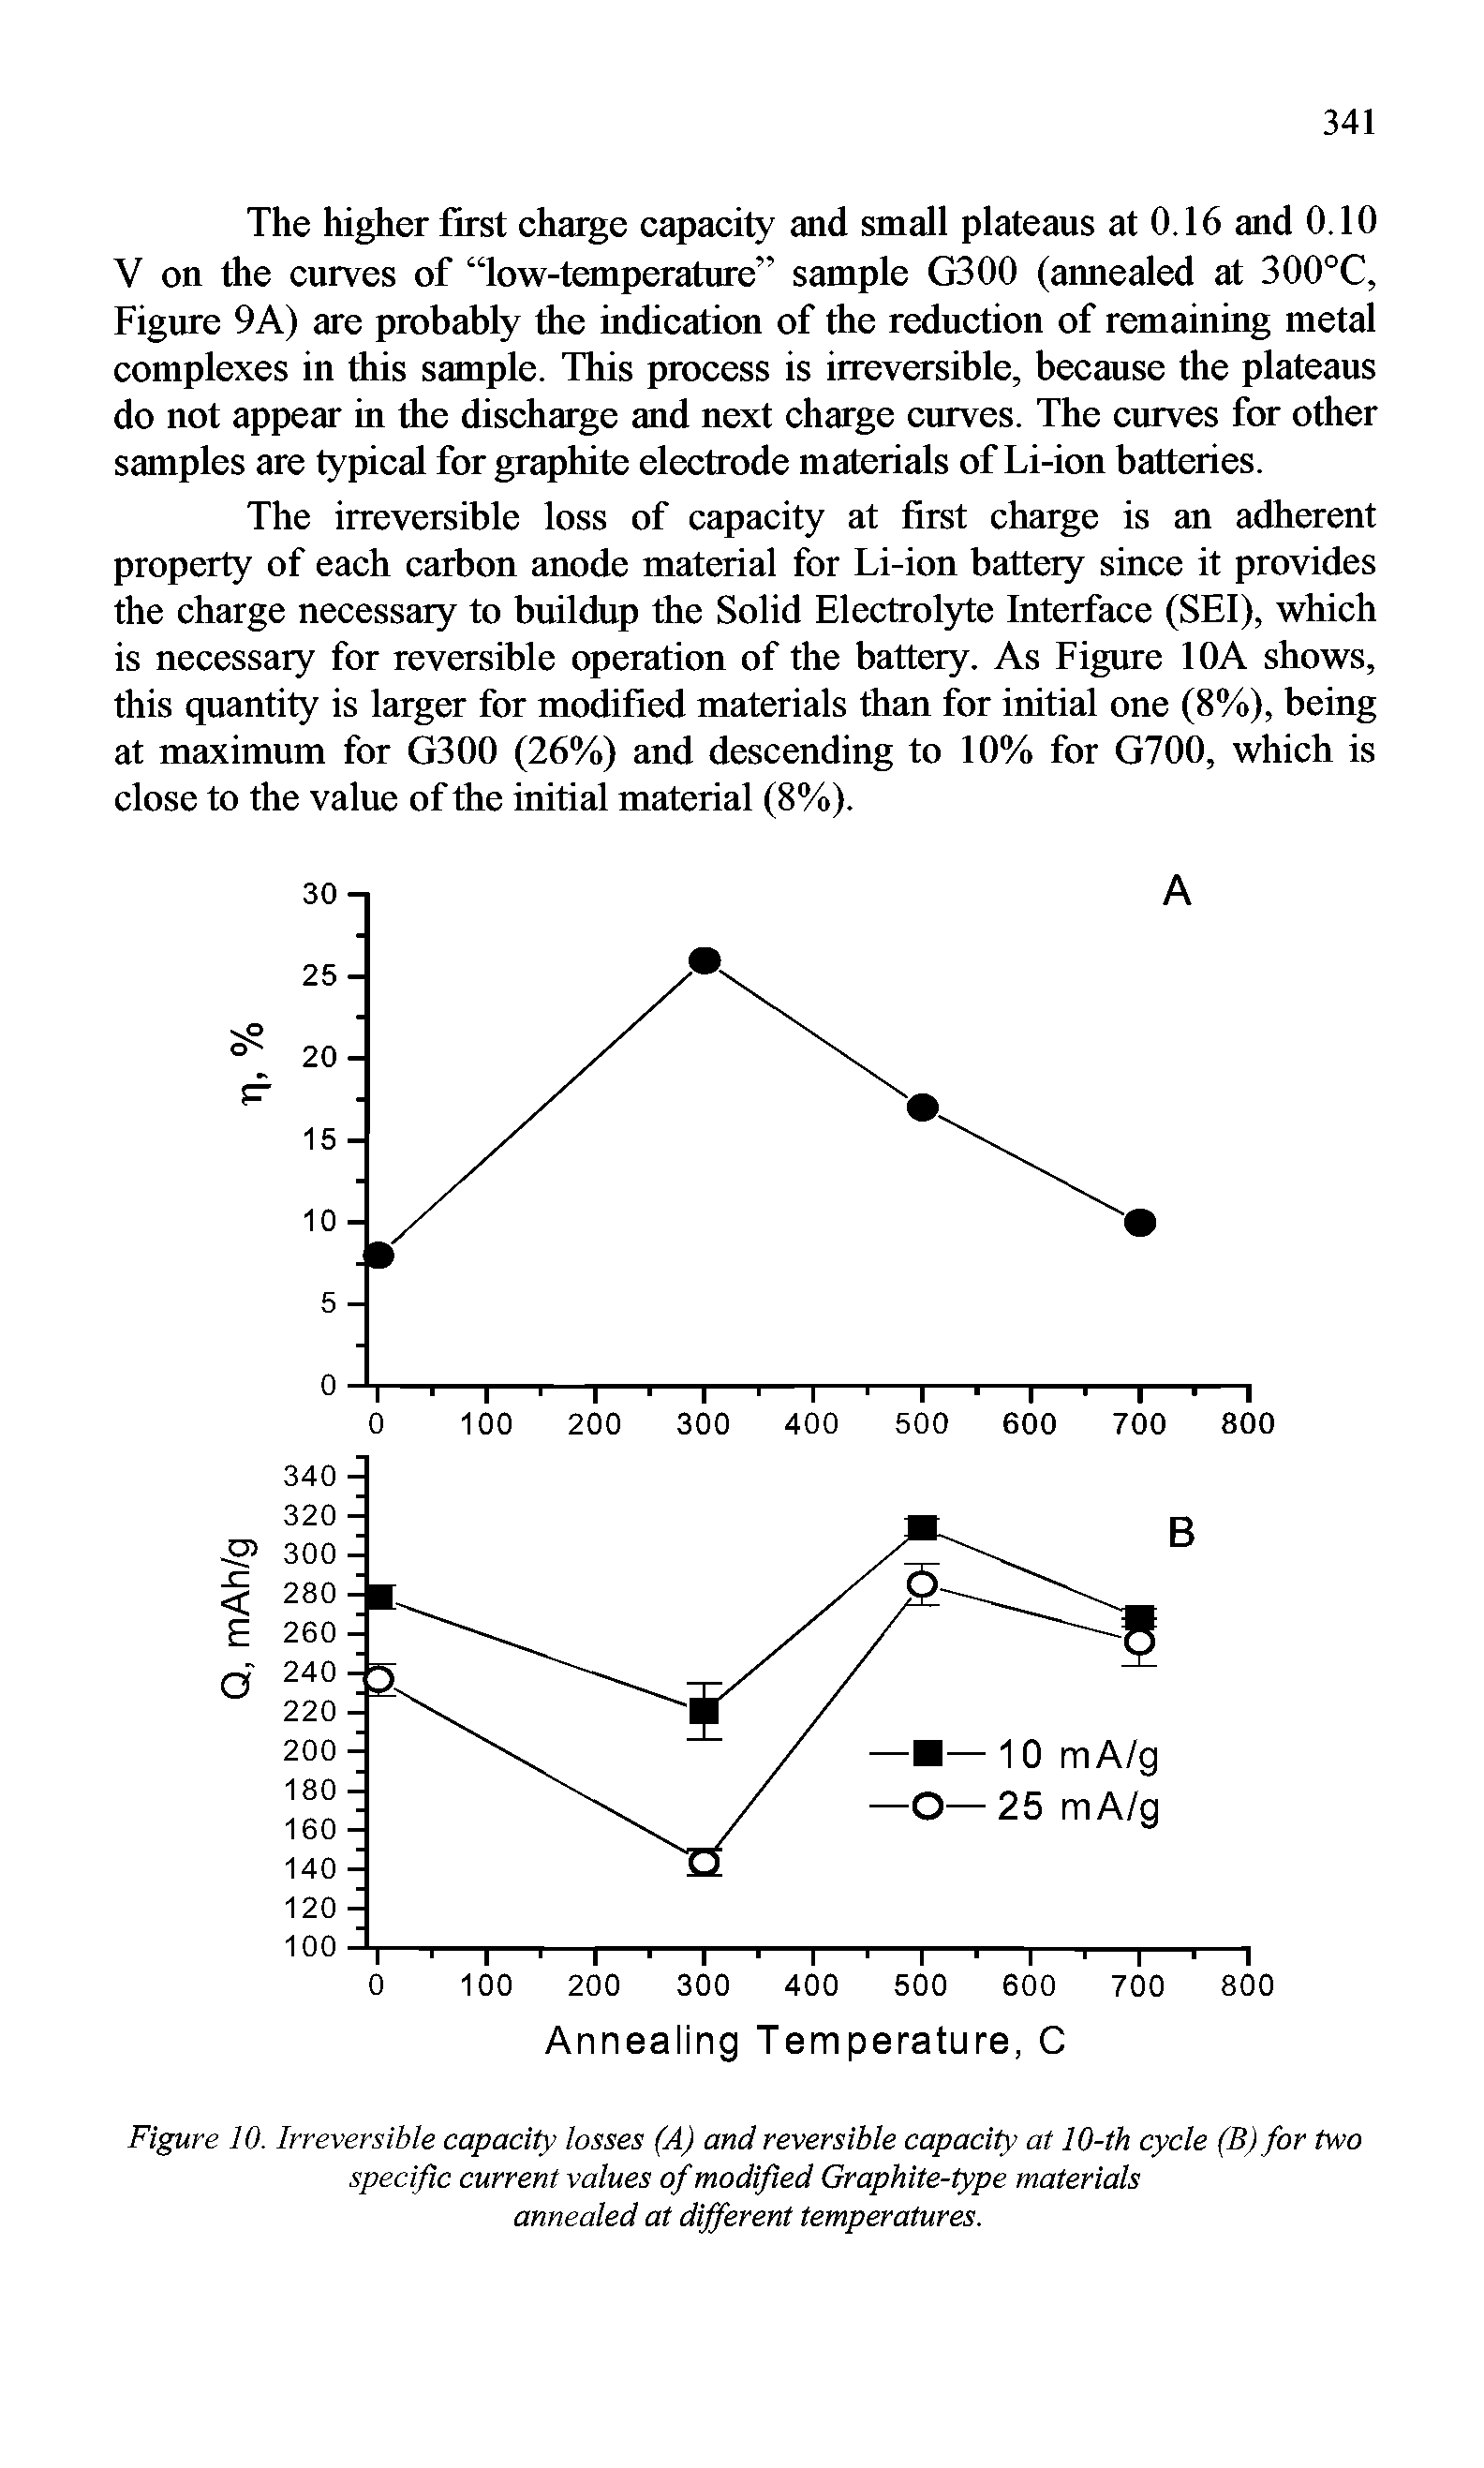 Figure 10. Irreversible capacity losses (A) and reversible capacity at 10-th cycle (B) for two specific current values of modified Graphite-type materials annealed at different temperatures.